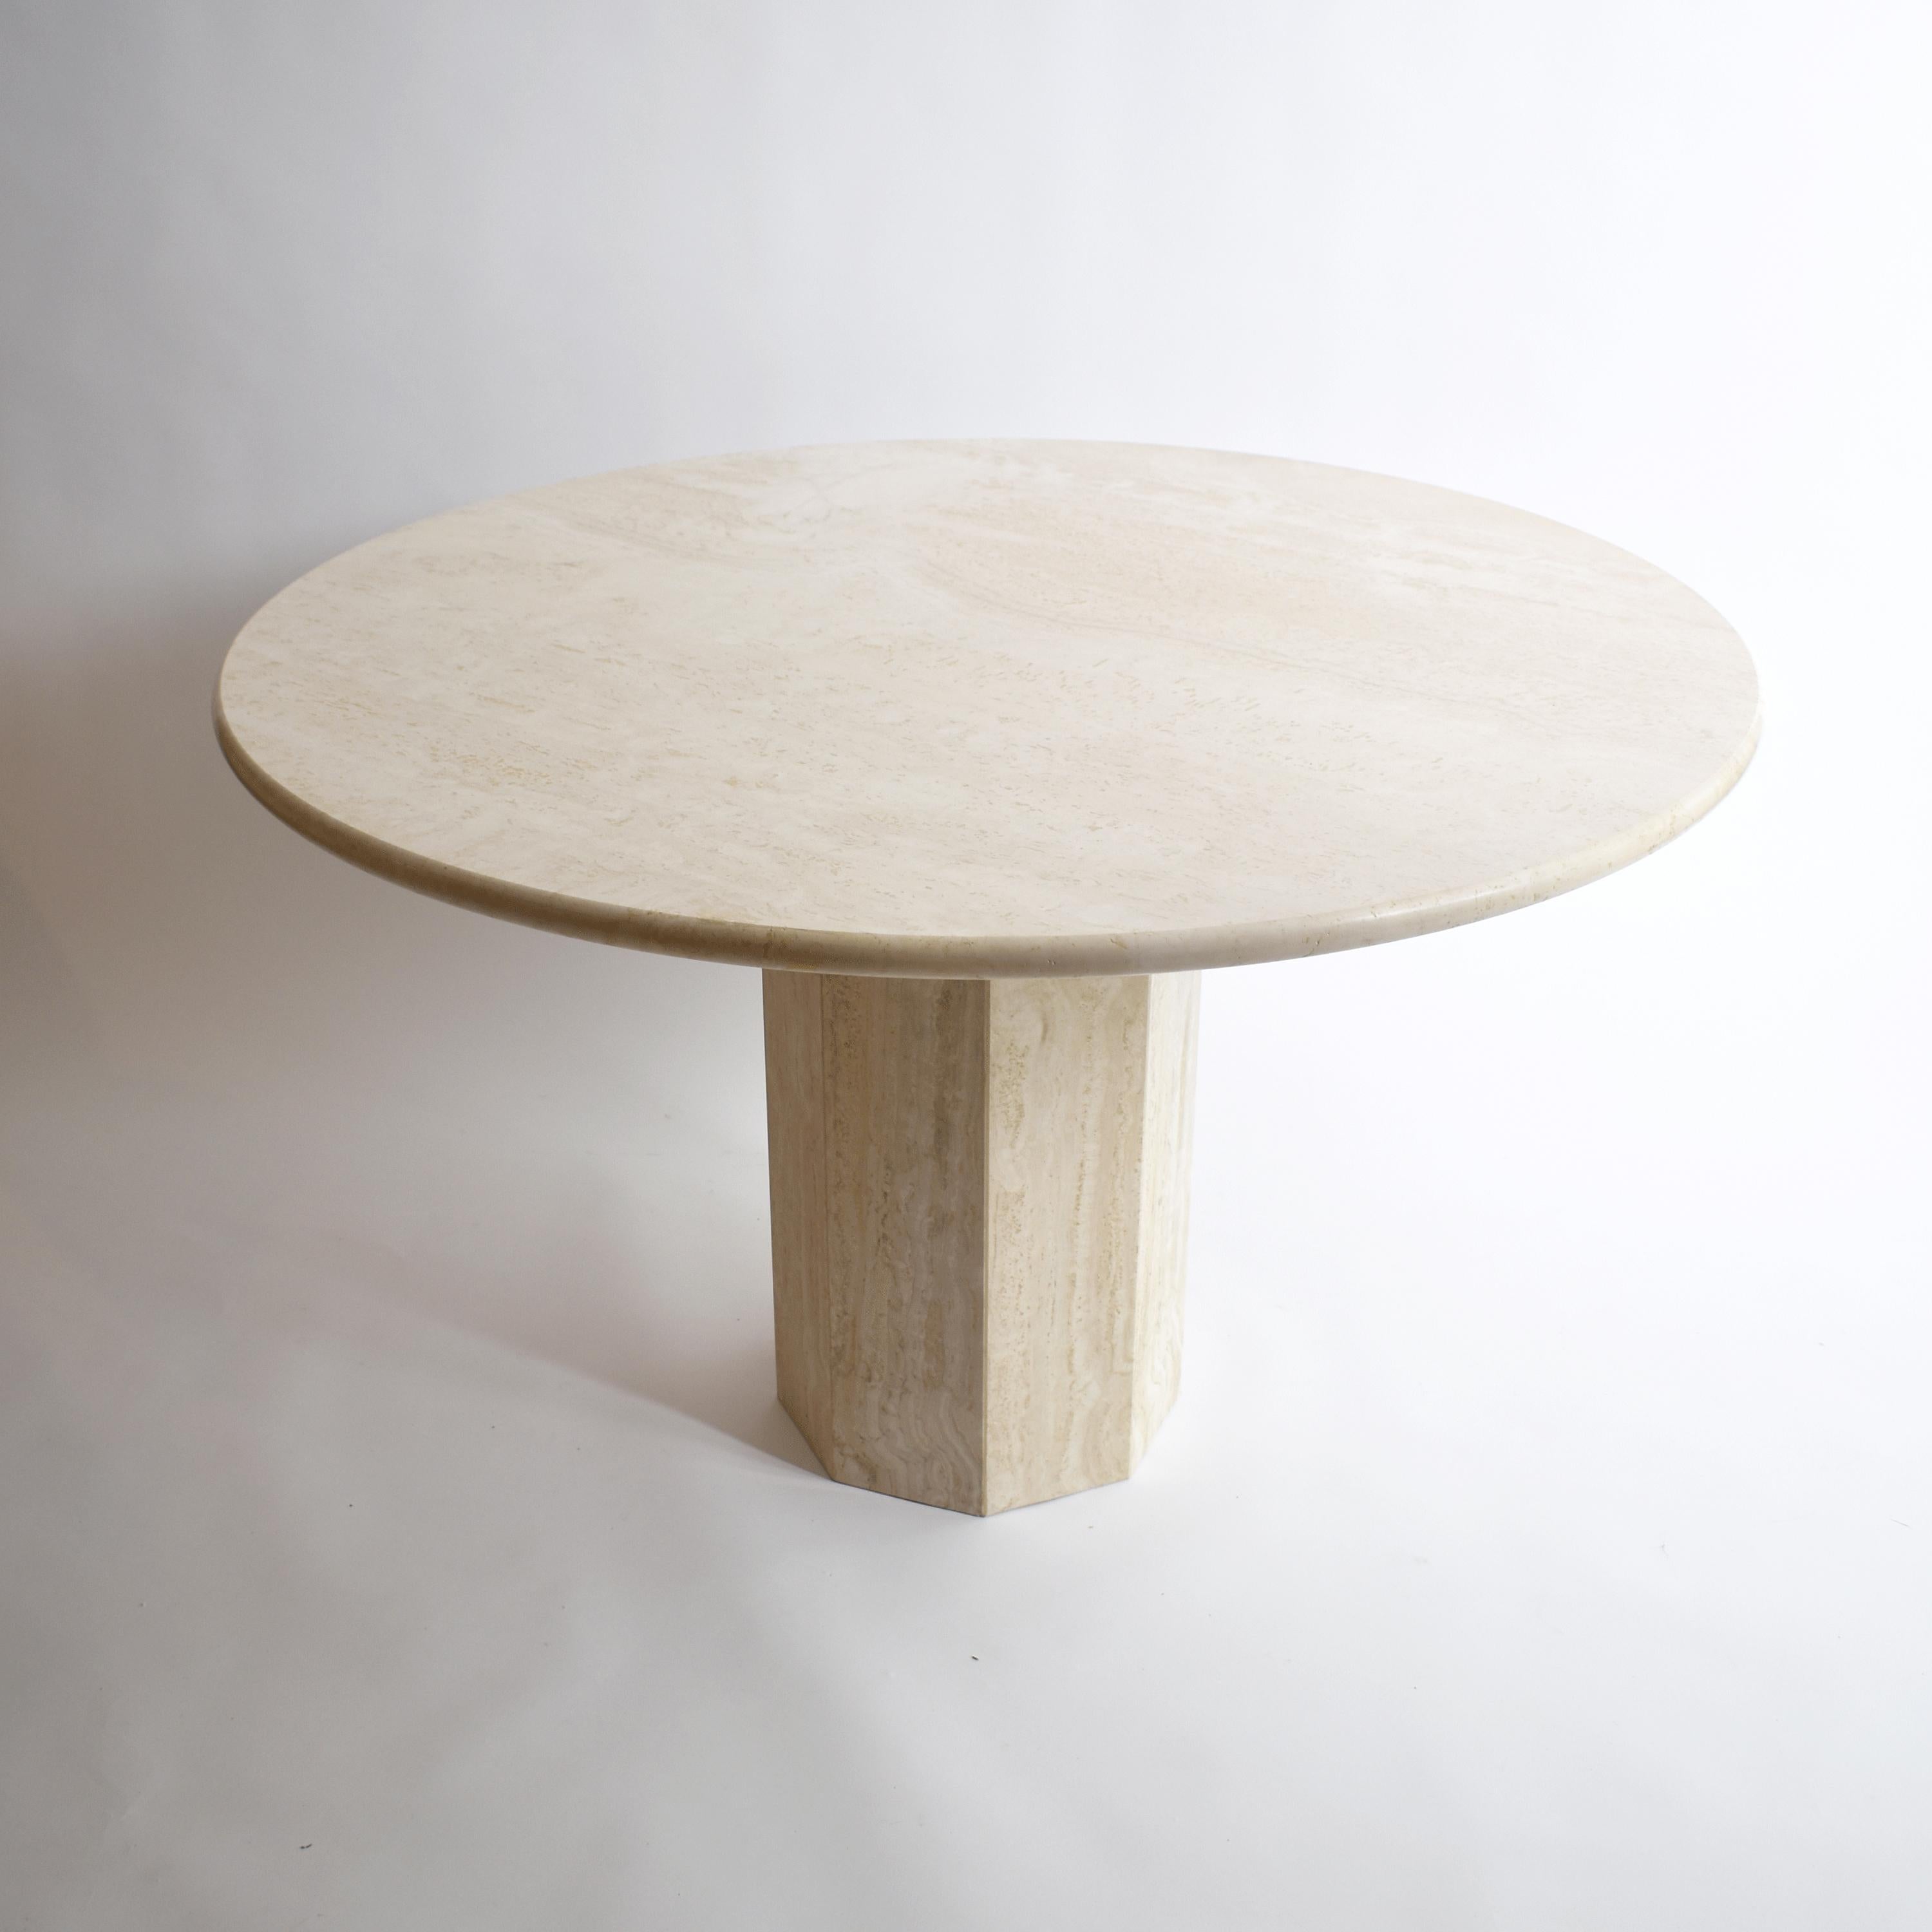 Italian Mid-Century Modern dining table. 
Made in cream travertine, with a nice shape and round edge, the top is sitting on a pedestal center foot.
Beautiful stone patterns, with sandy effects.
This table seats six guests comfortably.